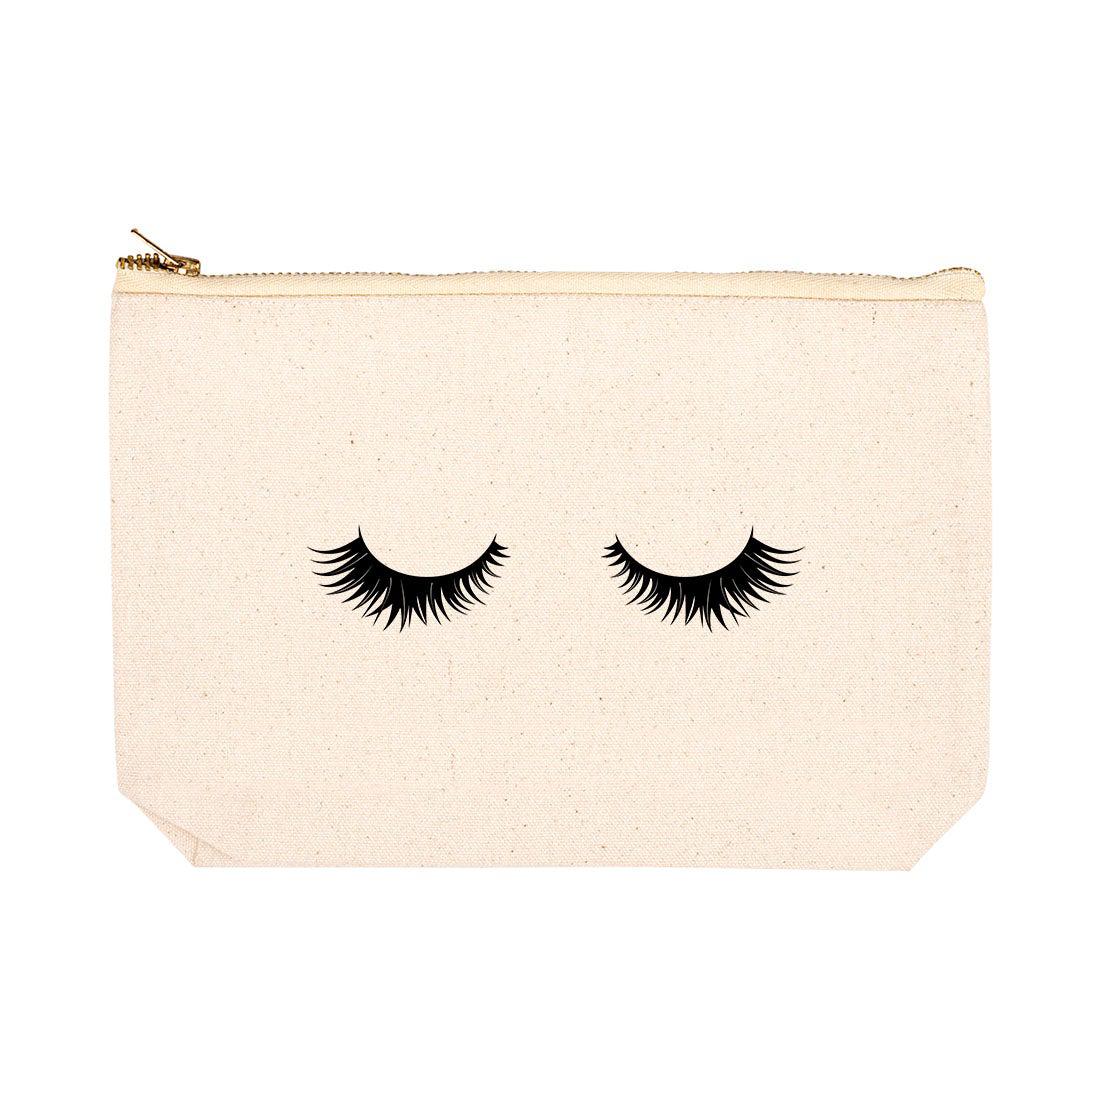 Andaz Press Funny Makeup Bag Canvas Cosmetic Bag with Zipper Cute Eyelashes Makeup Pouch 6.5 x 9 inch, Size: Small, Beige